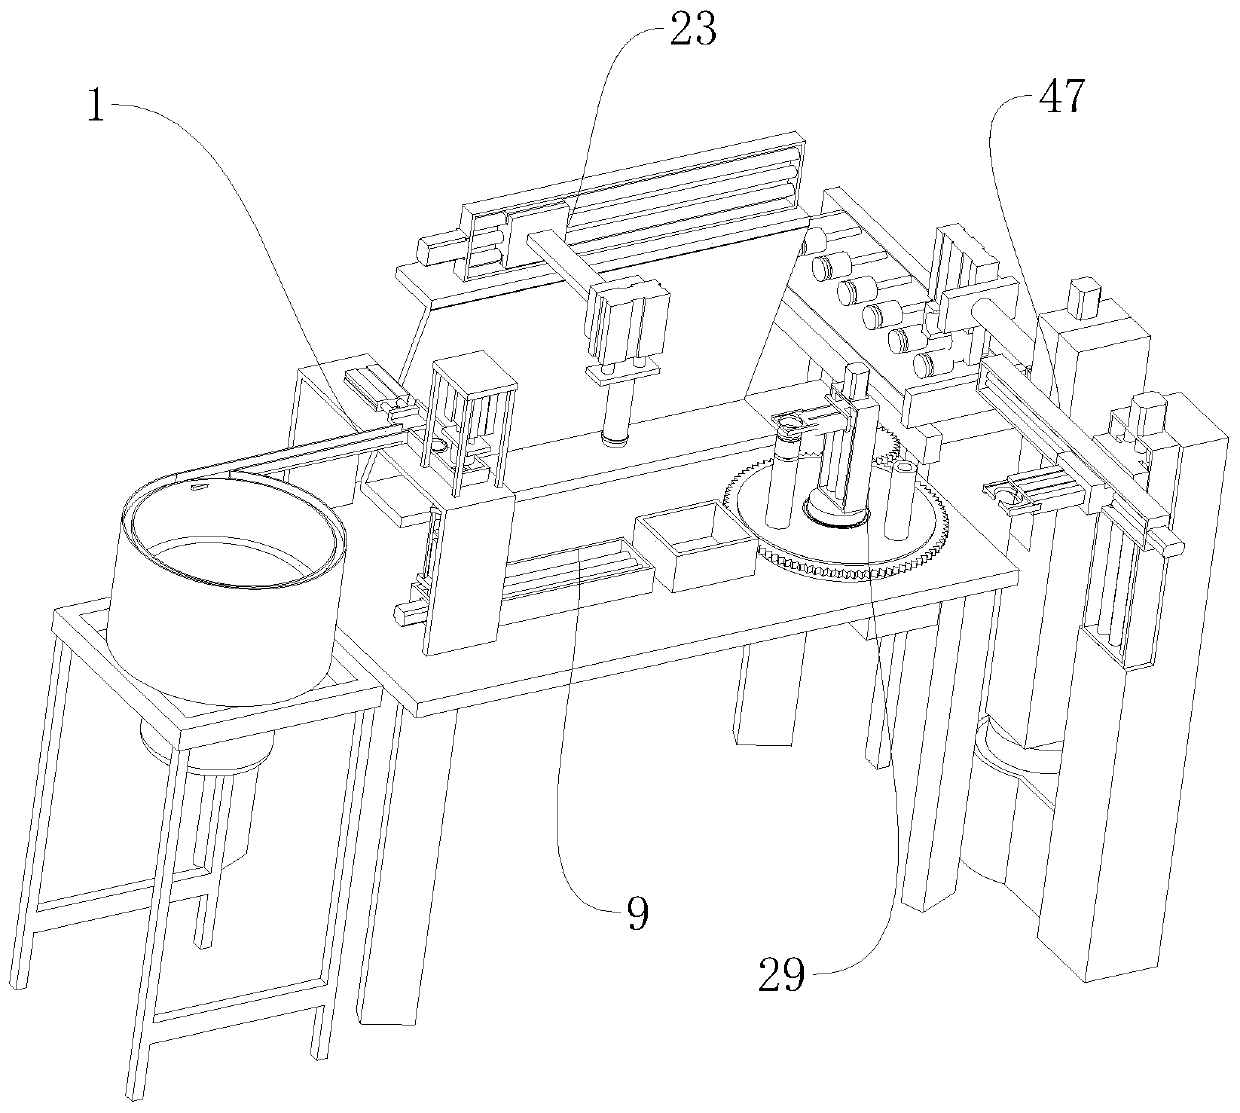 Equipment for automatically assembling sealing rings of piston rods